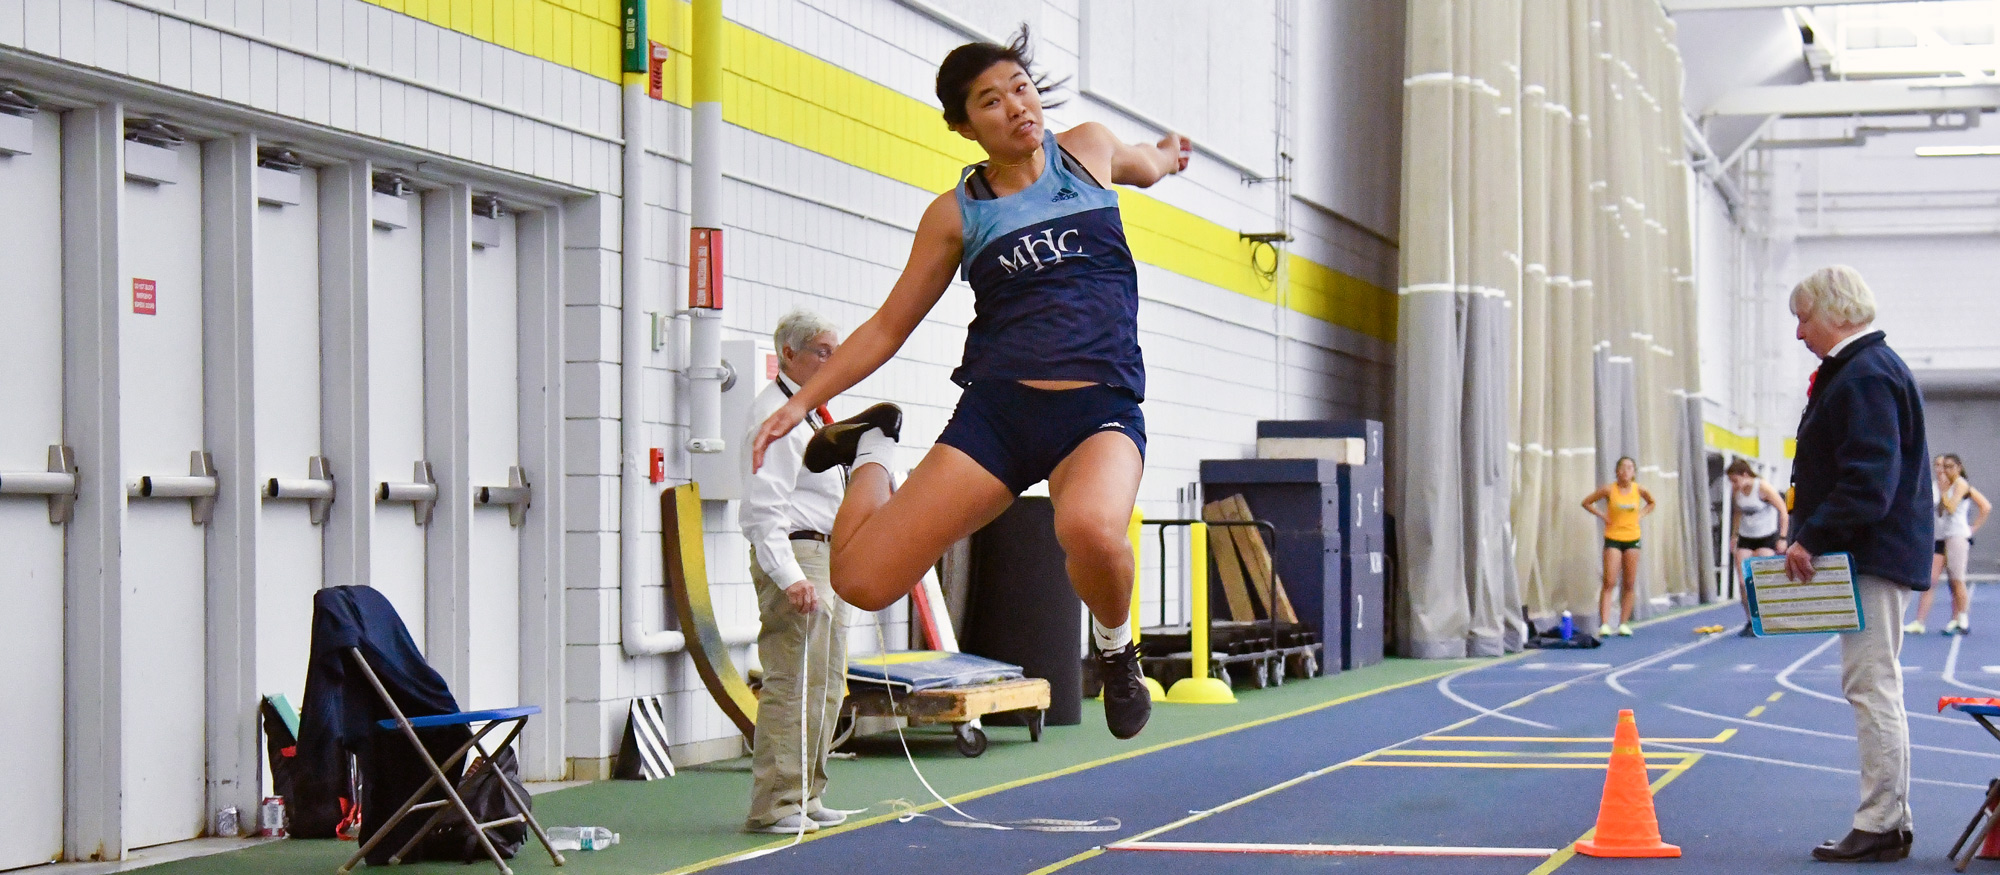 Elle Rimando moved into fifth place on Mount Holyoke's all-time performance list in the long jump at the Tufts Cupid Challenge on Feb. 4, 2023. (RJB Sports file photo)